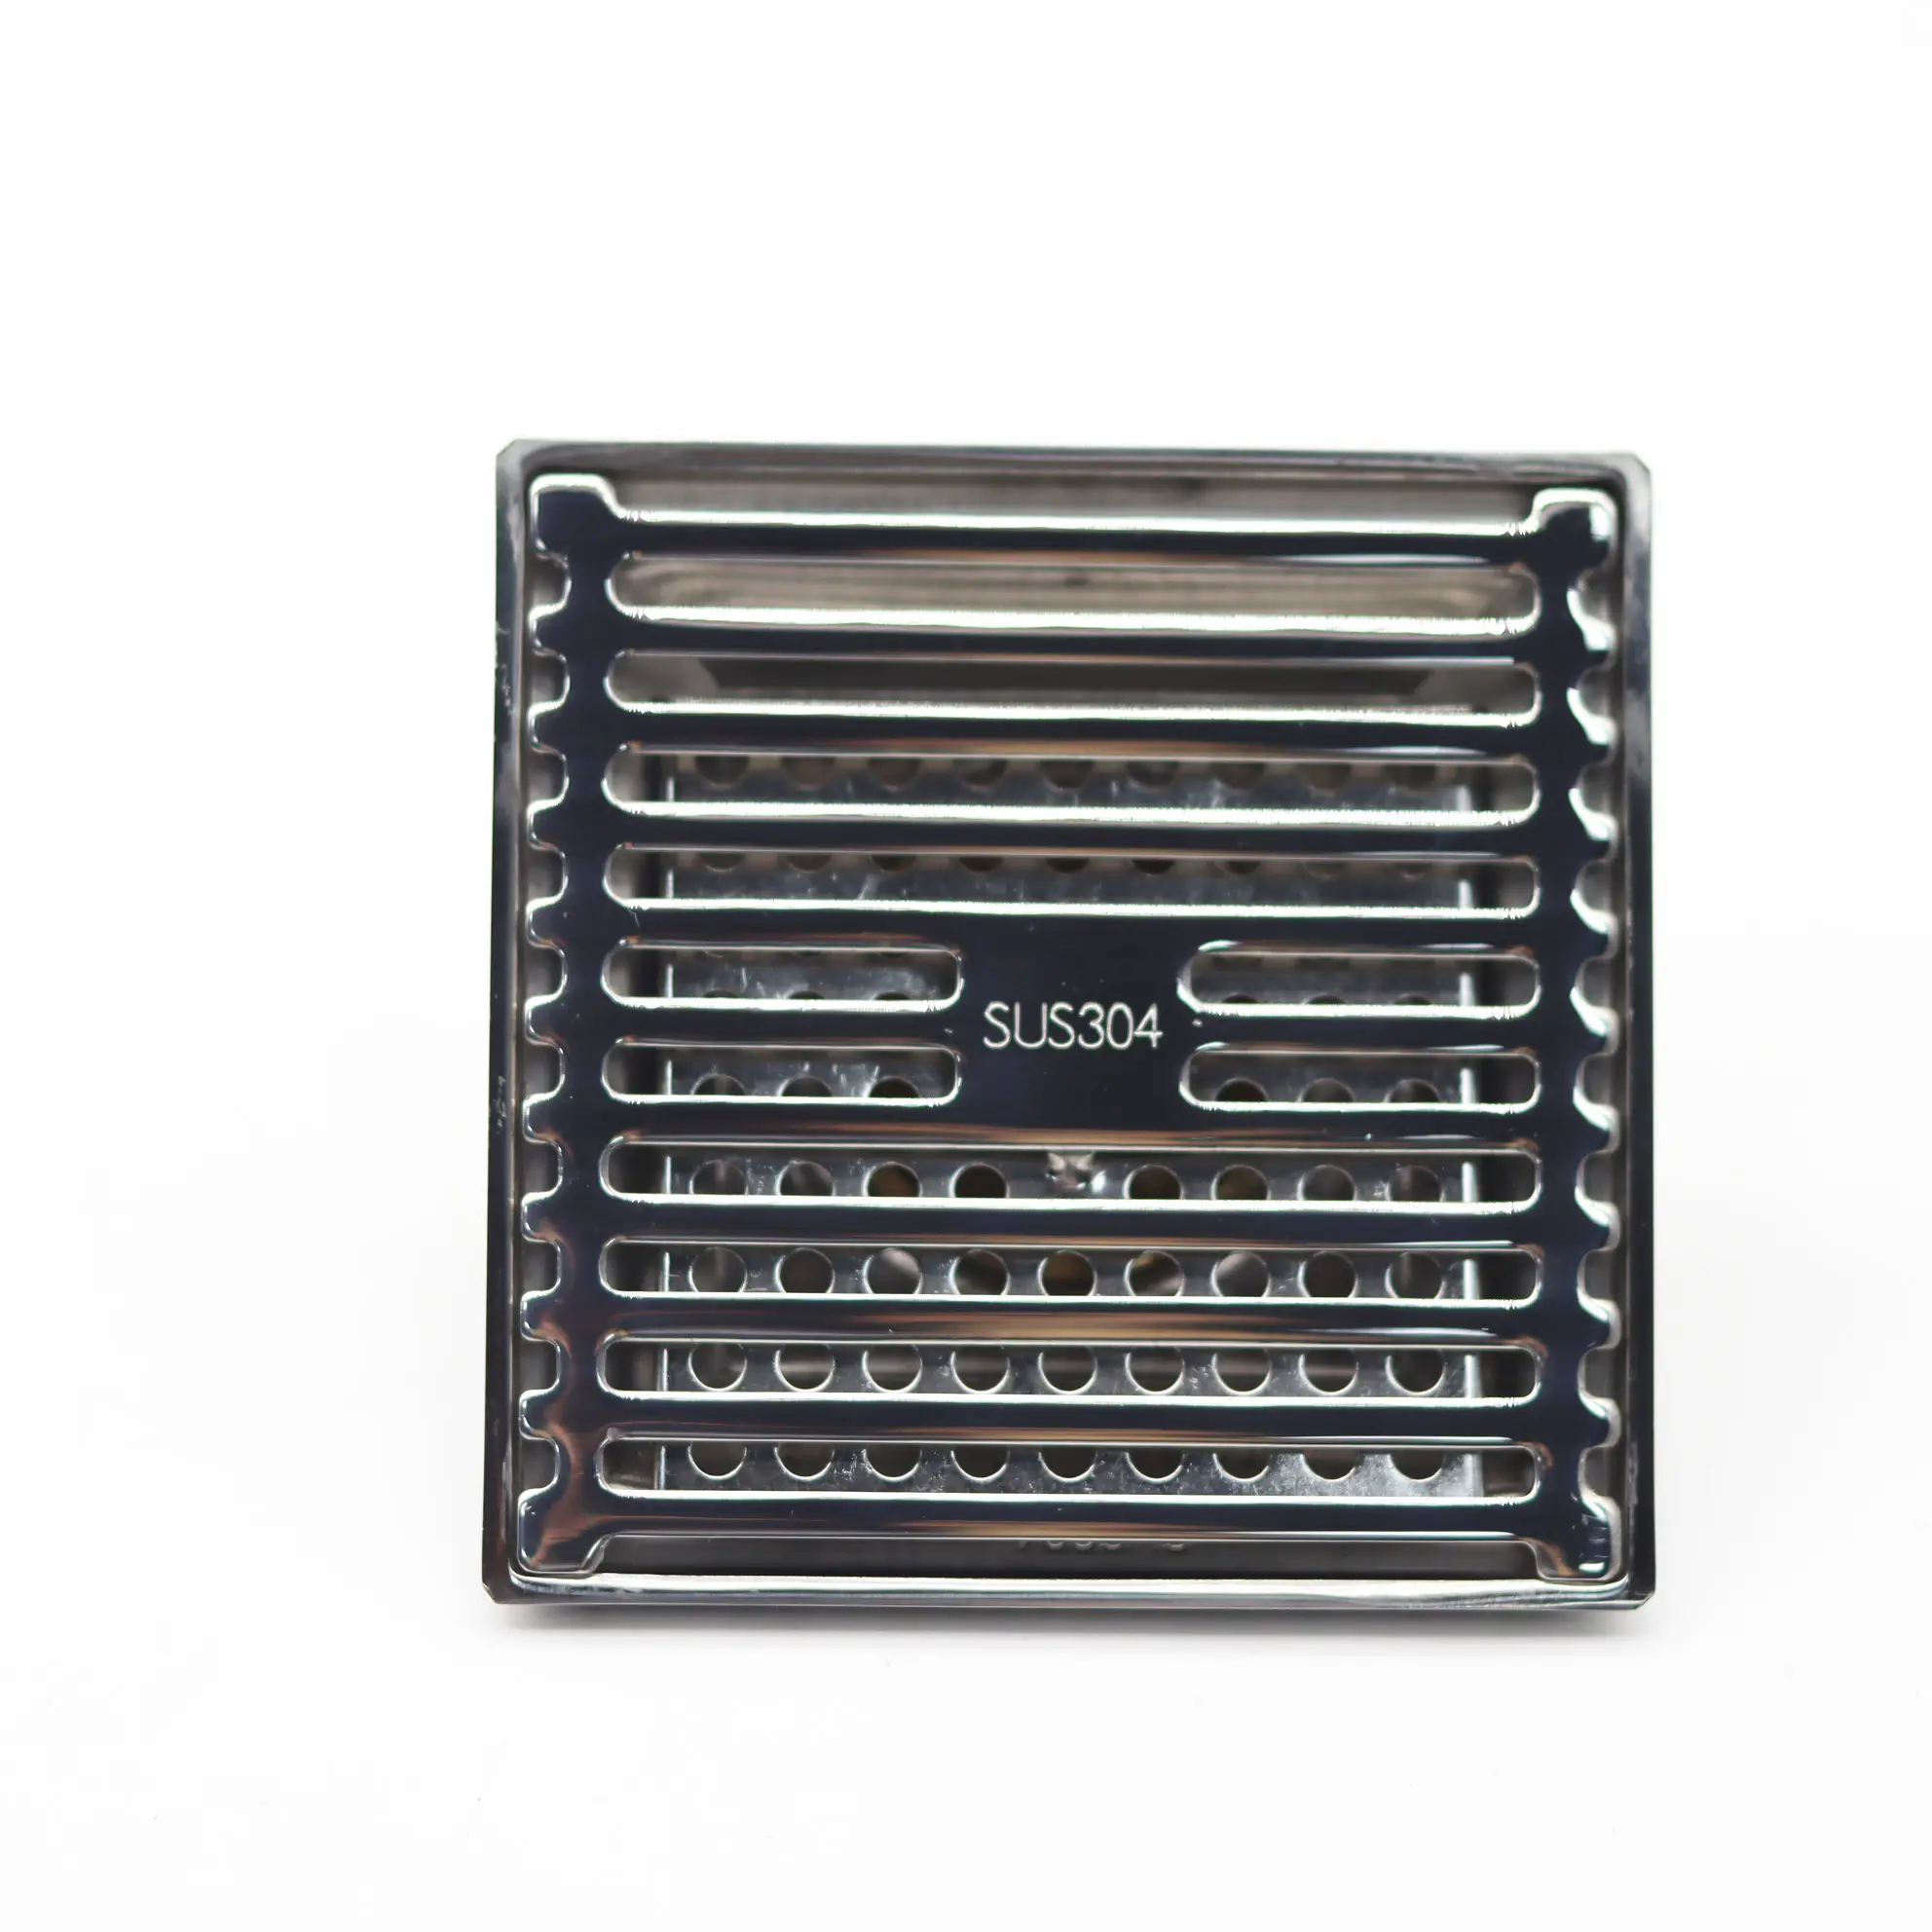 High quality commercial kitchen stainless steel 316 304 floor drain cover